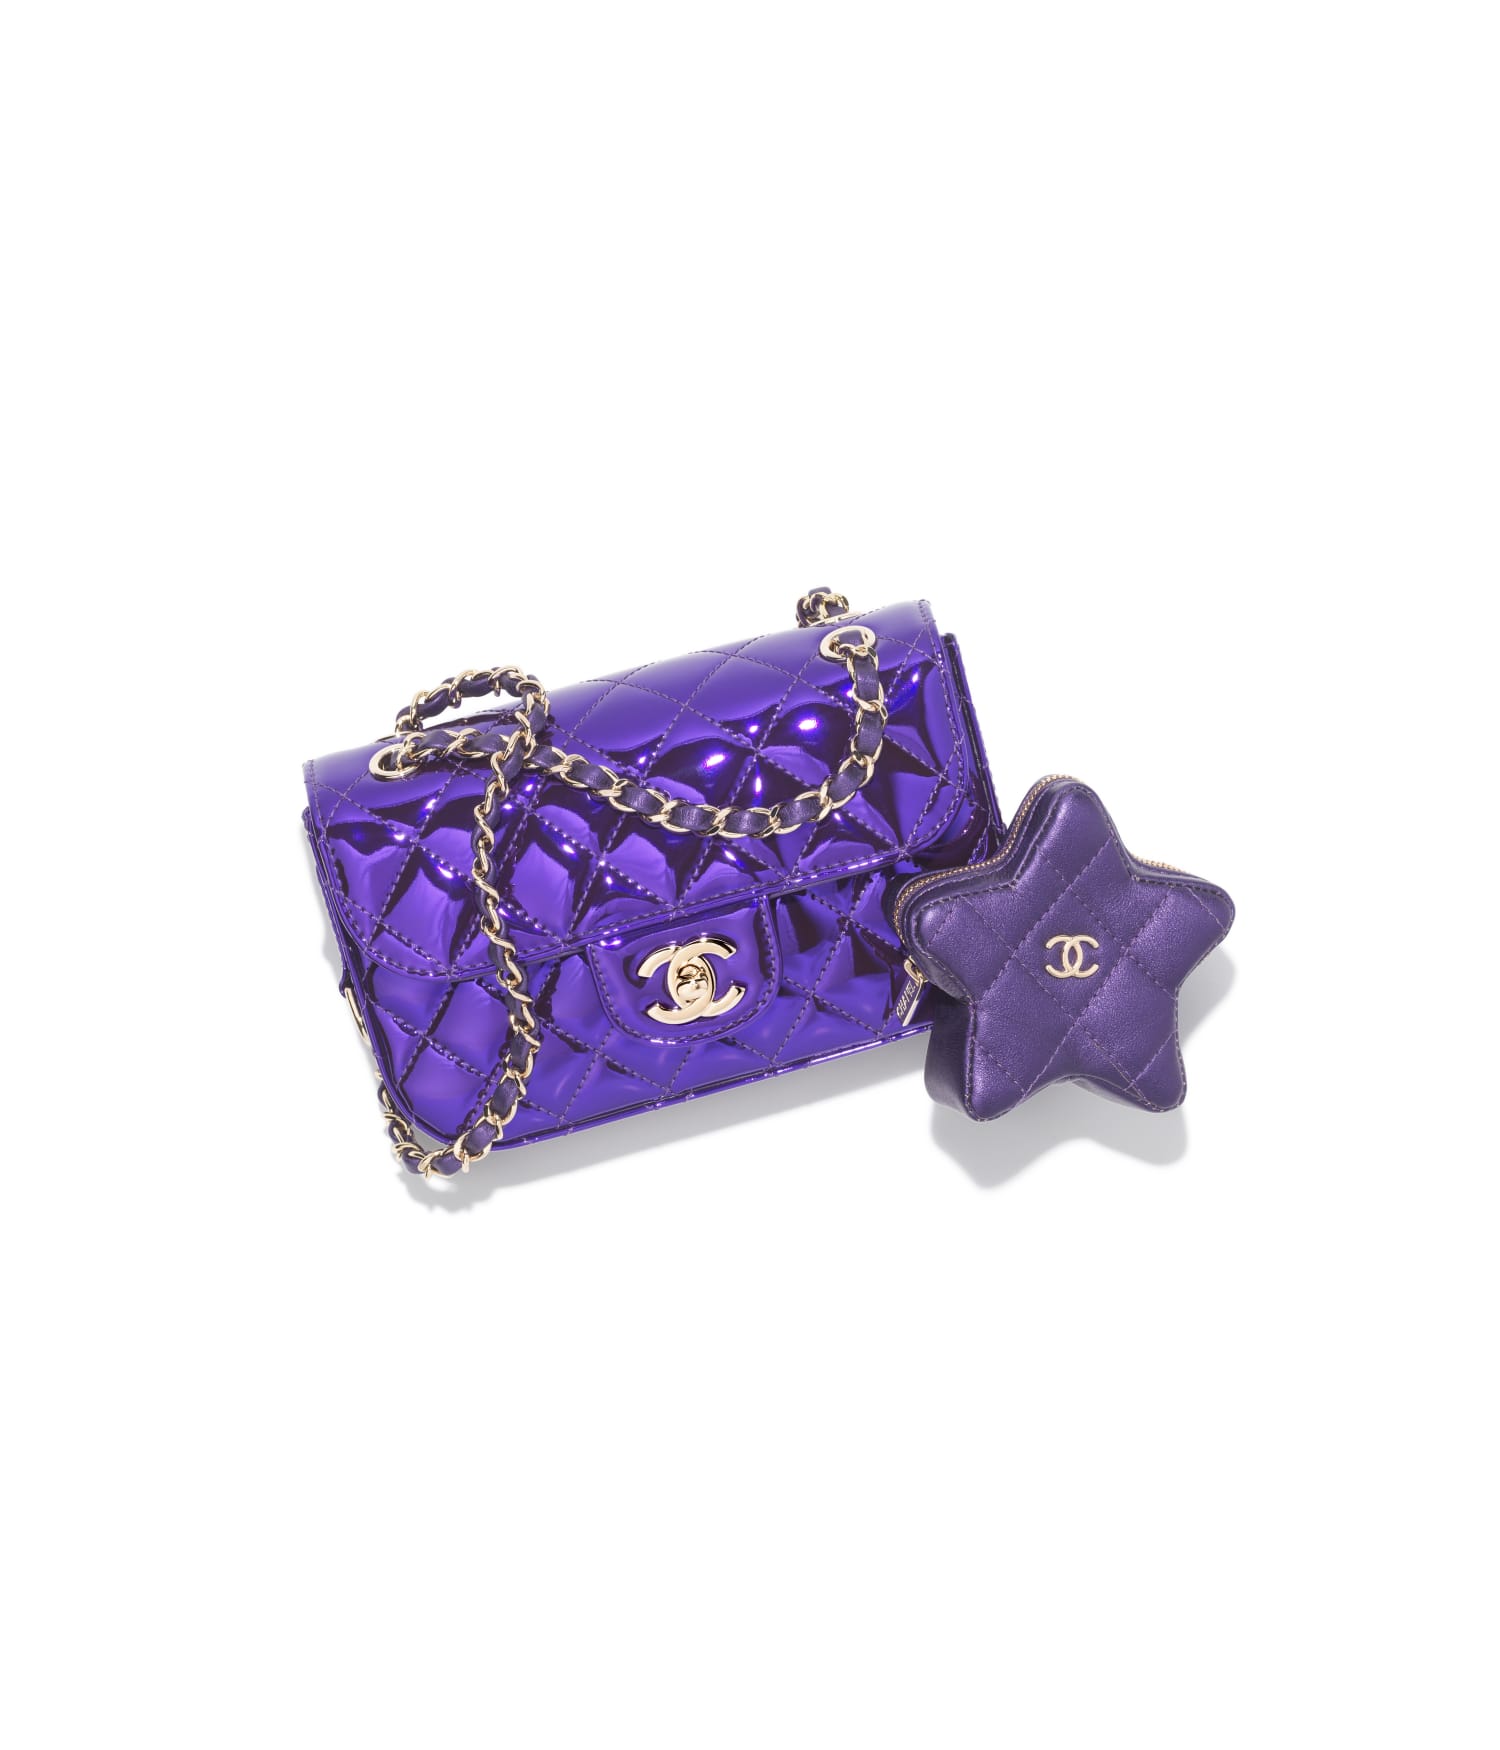 chanel_bag-in-purple-mirror-leather-metallic-leather-and-metal-as4646-b14873-nt669s-hd-LD